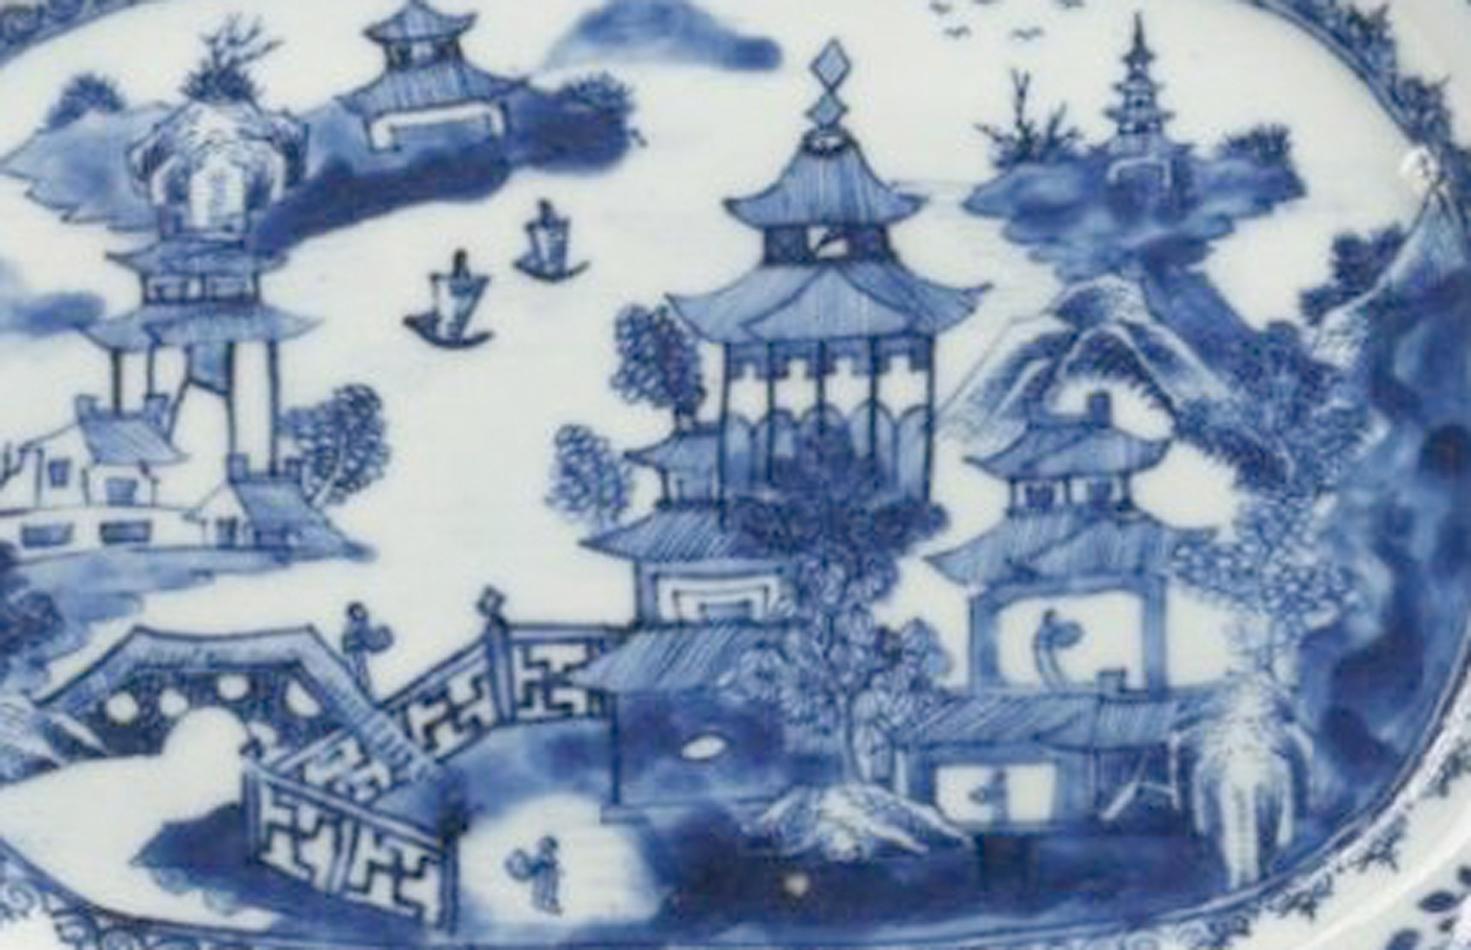 Chinese Export porcelain blue & white dish,
Circa 1770

The Chinese Export porcelain rectangular dish with canted corners is painted with a view of a pagoda and other buildings with a zig-zag fence and a figure in the garden. In the background